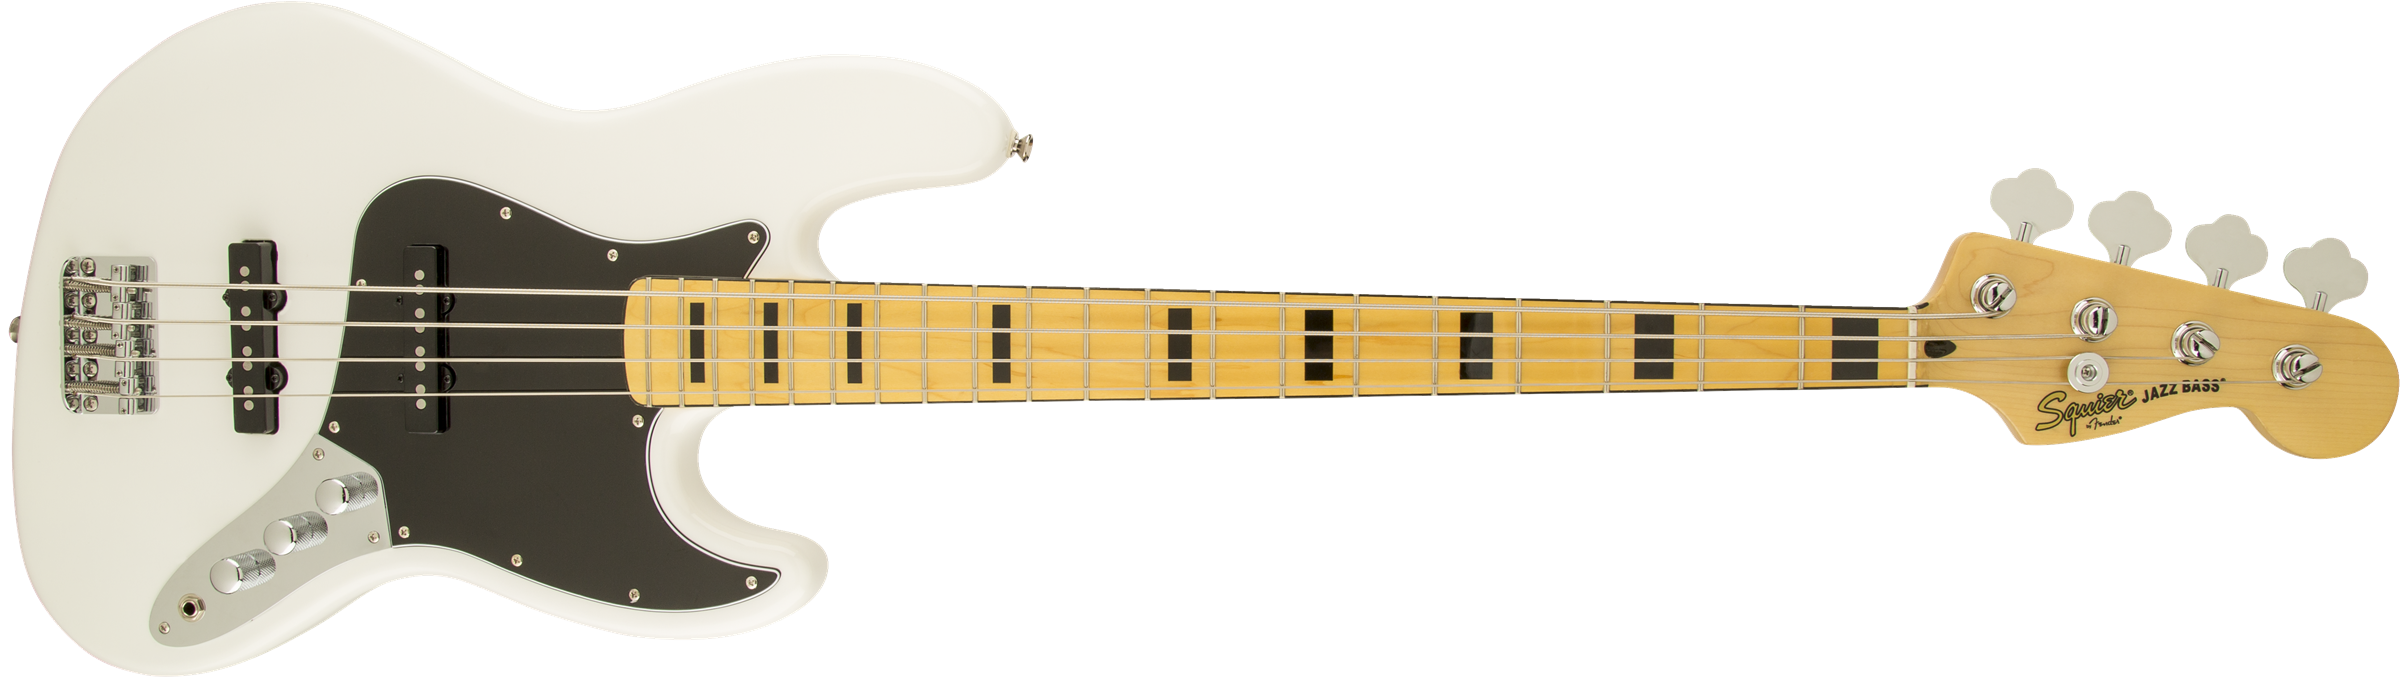 Squier Jazz Bass Vintage Modified 70 2013 Mn Olympic White - Solid body electric bass - Variation 1